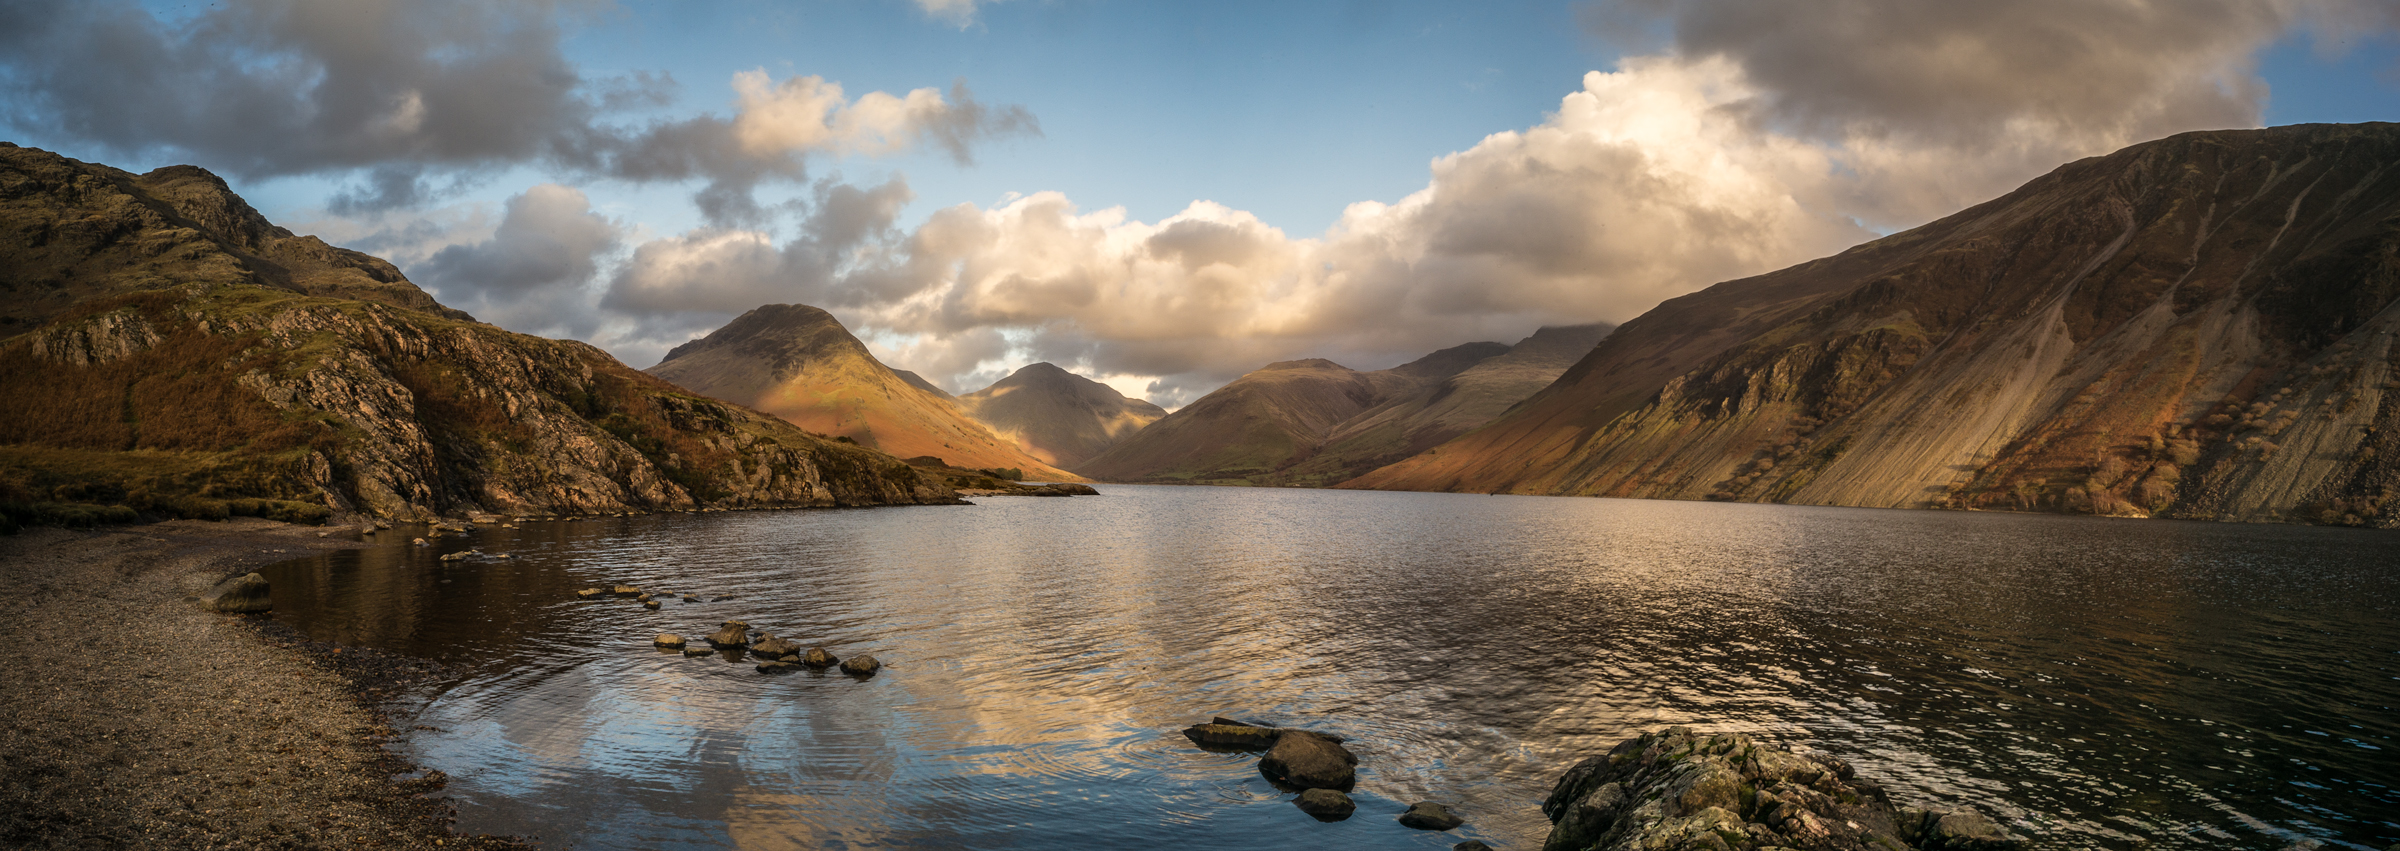 Wastwater
